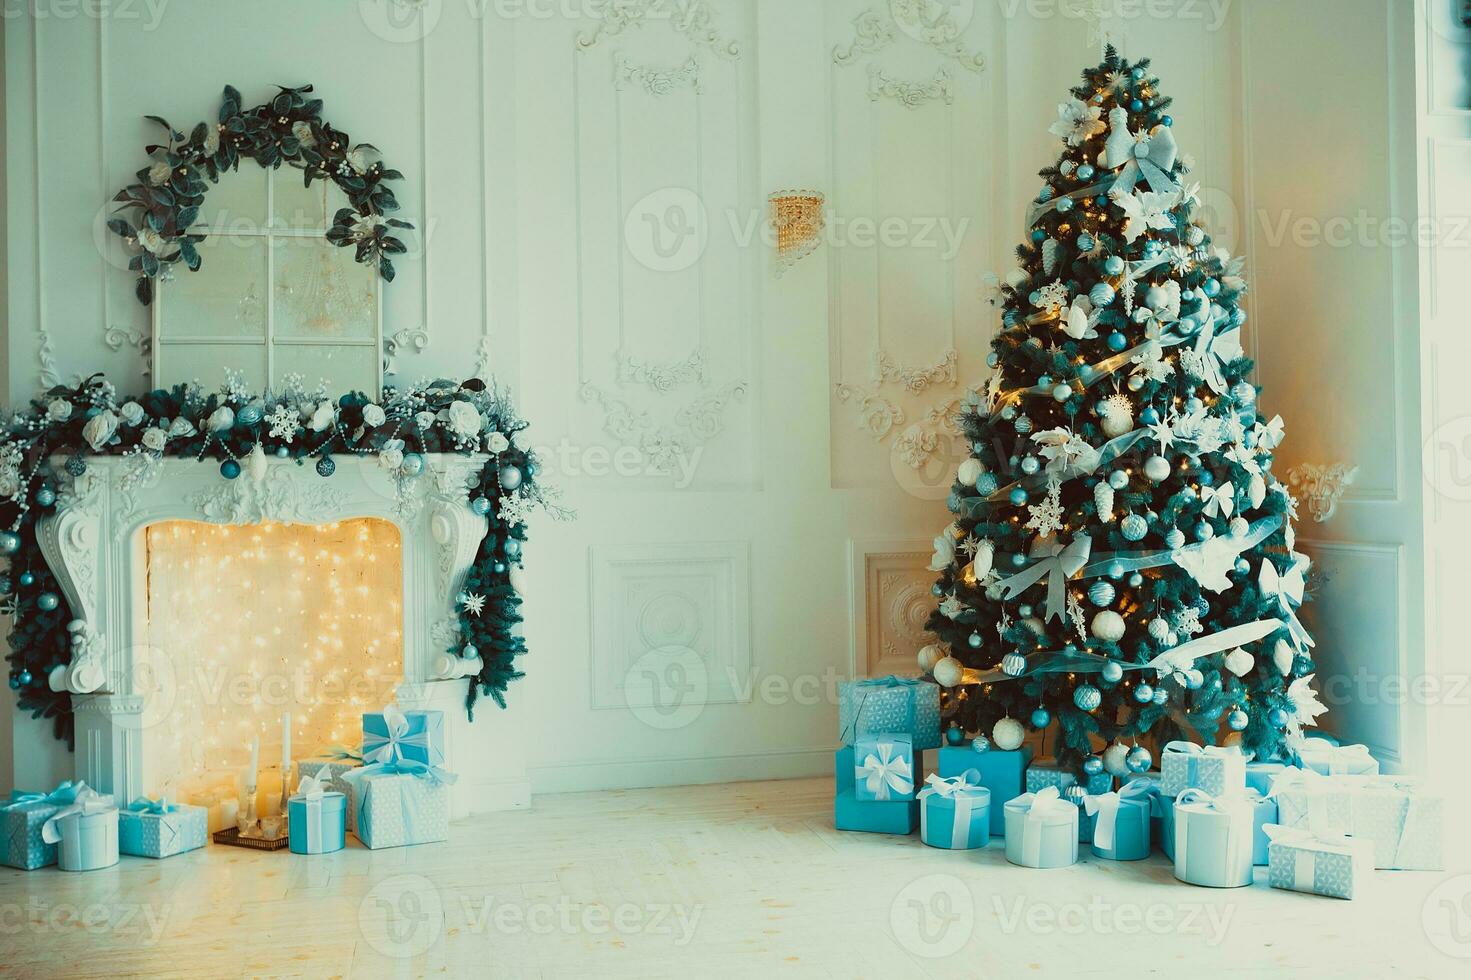 Christmas interior stock photos. Explore warm and inviting holiday themed home settings, adorned with twinkling lights, stockings, and beautifully decorated Christmas trees. photo